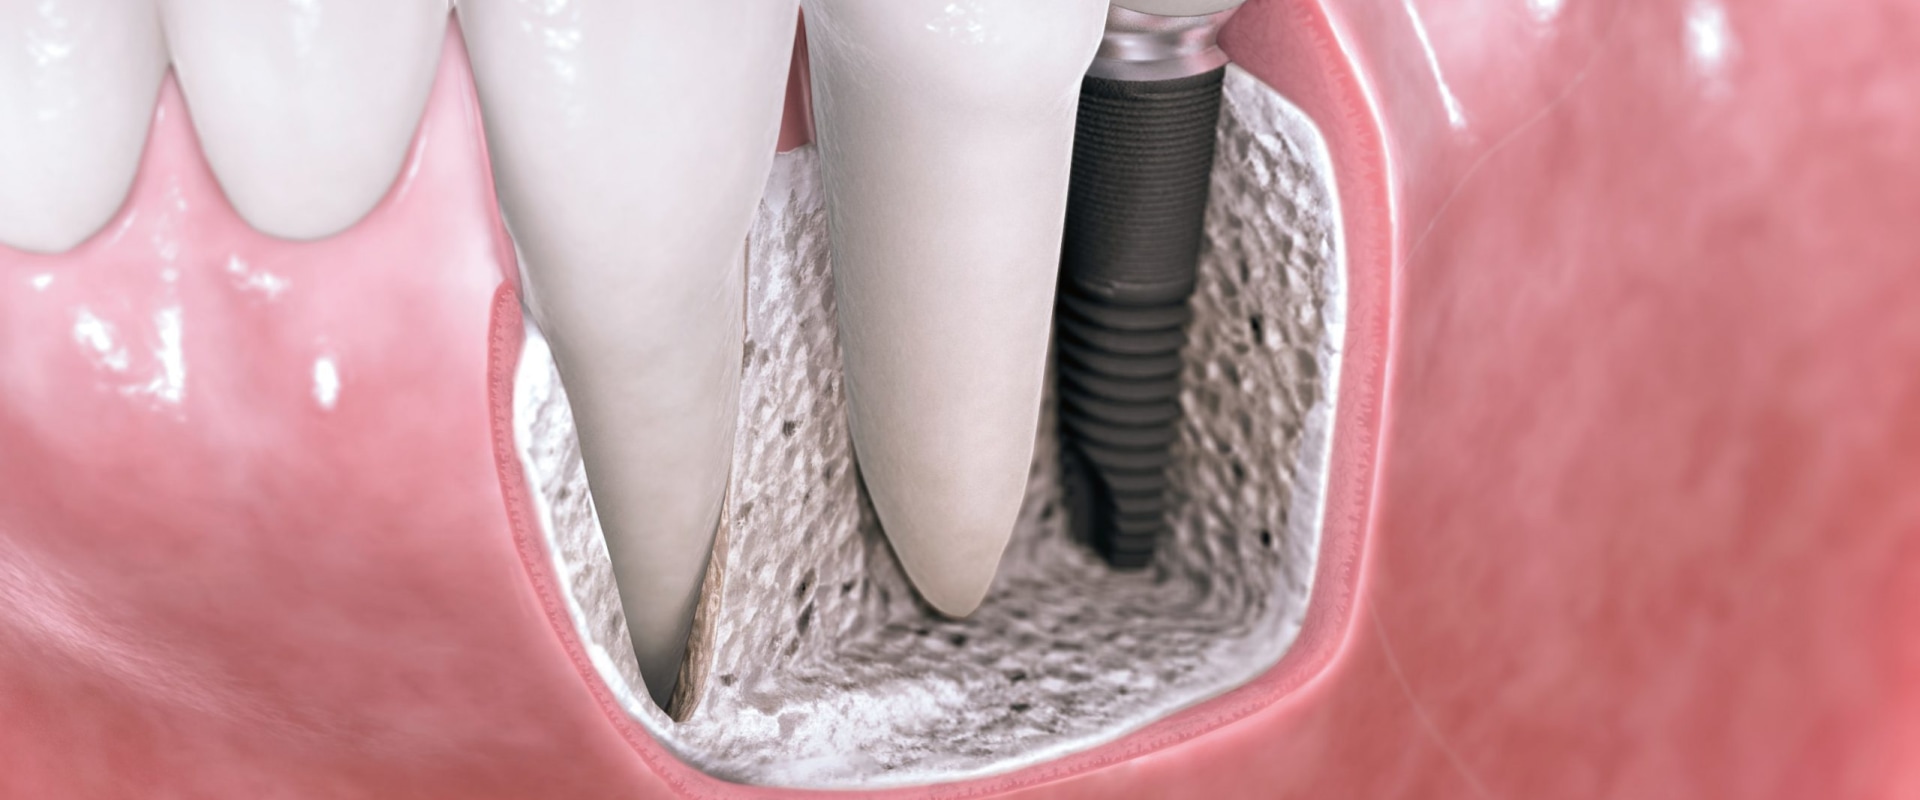 Does general dentistry include implants?